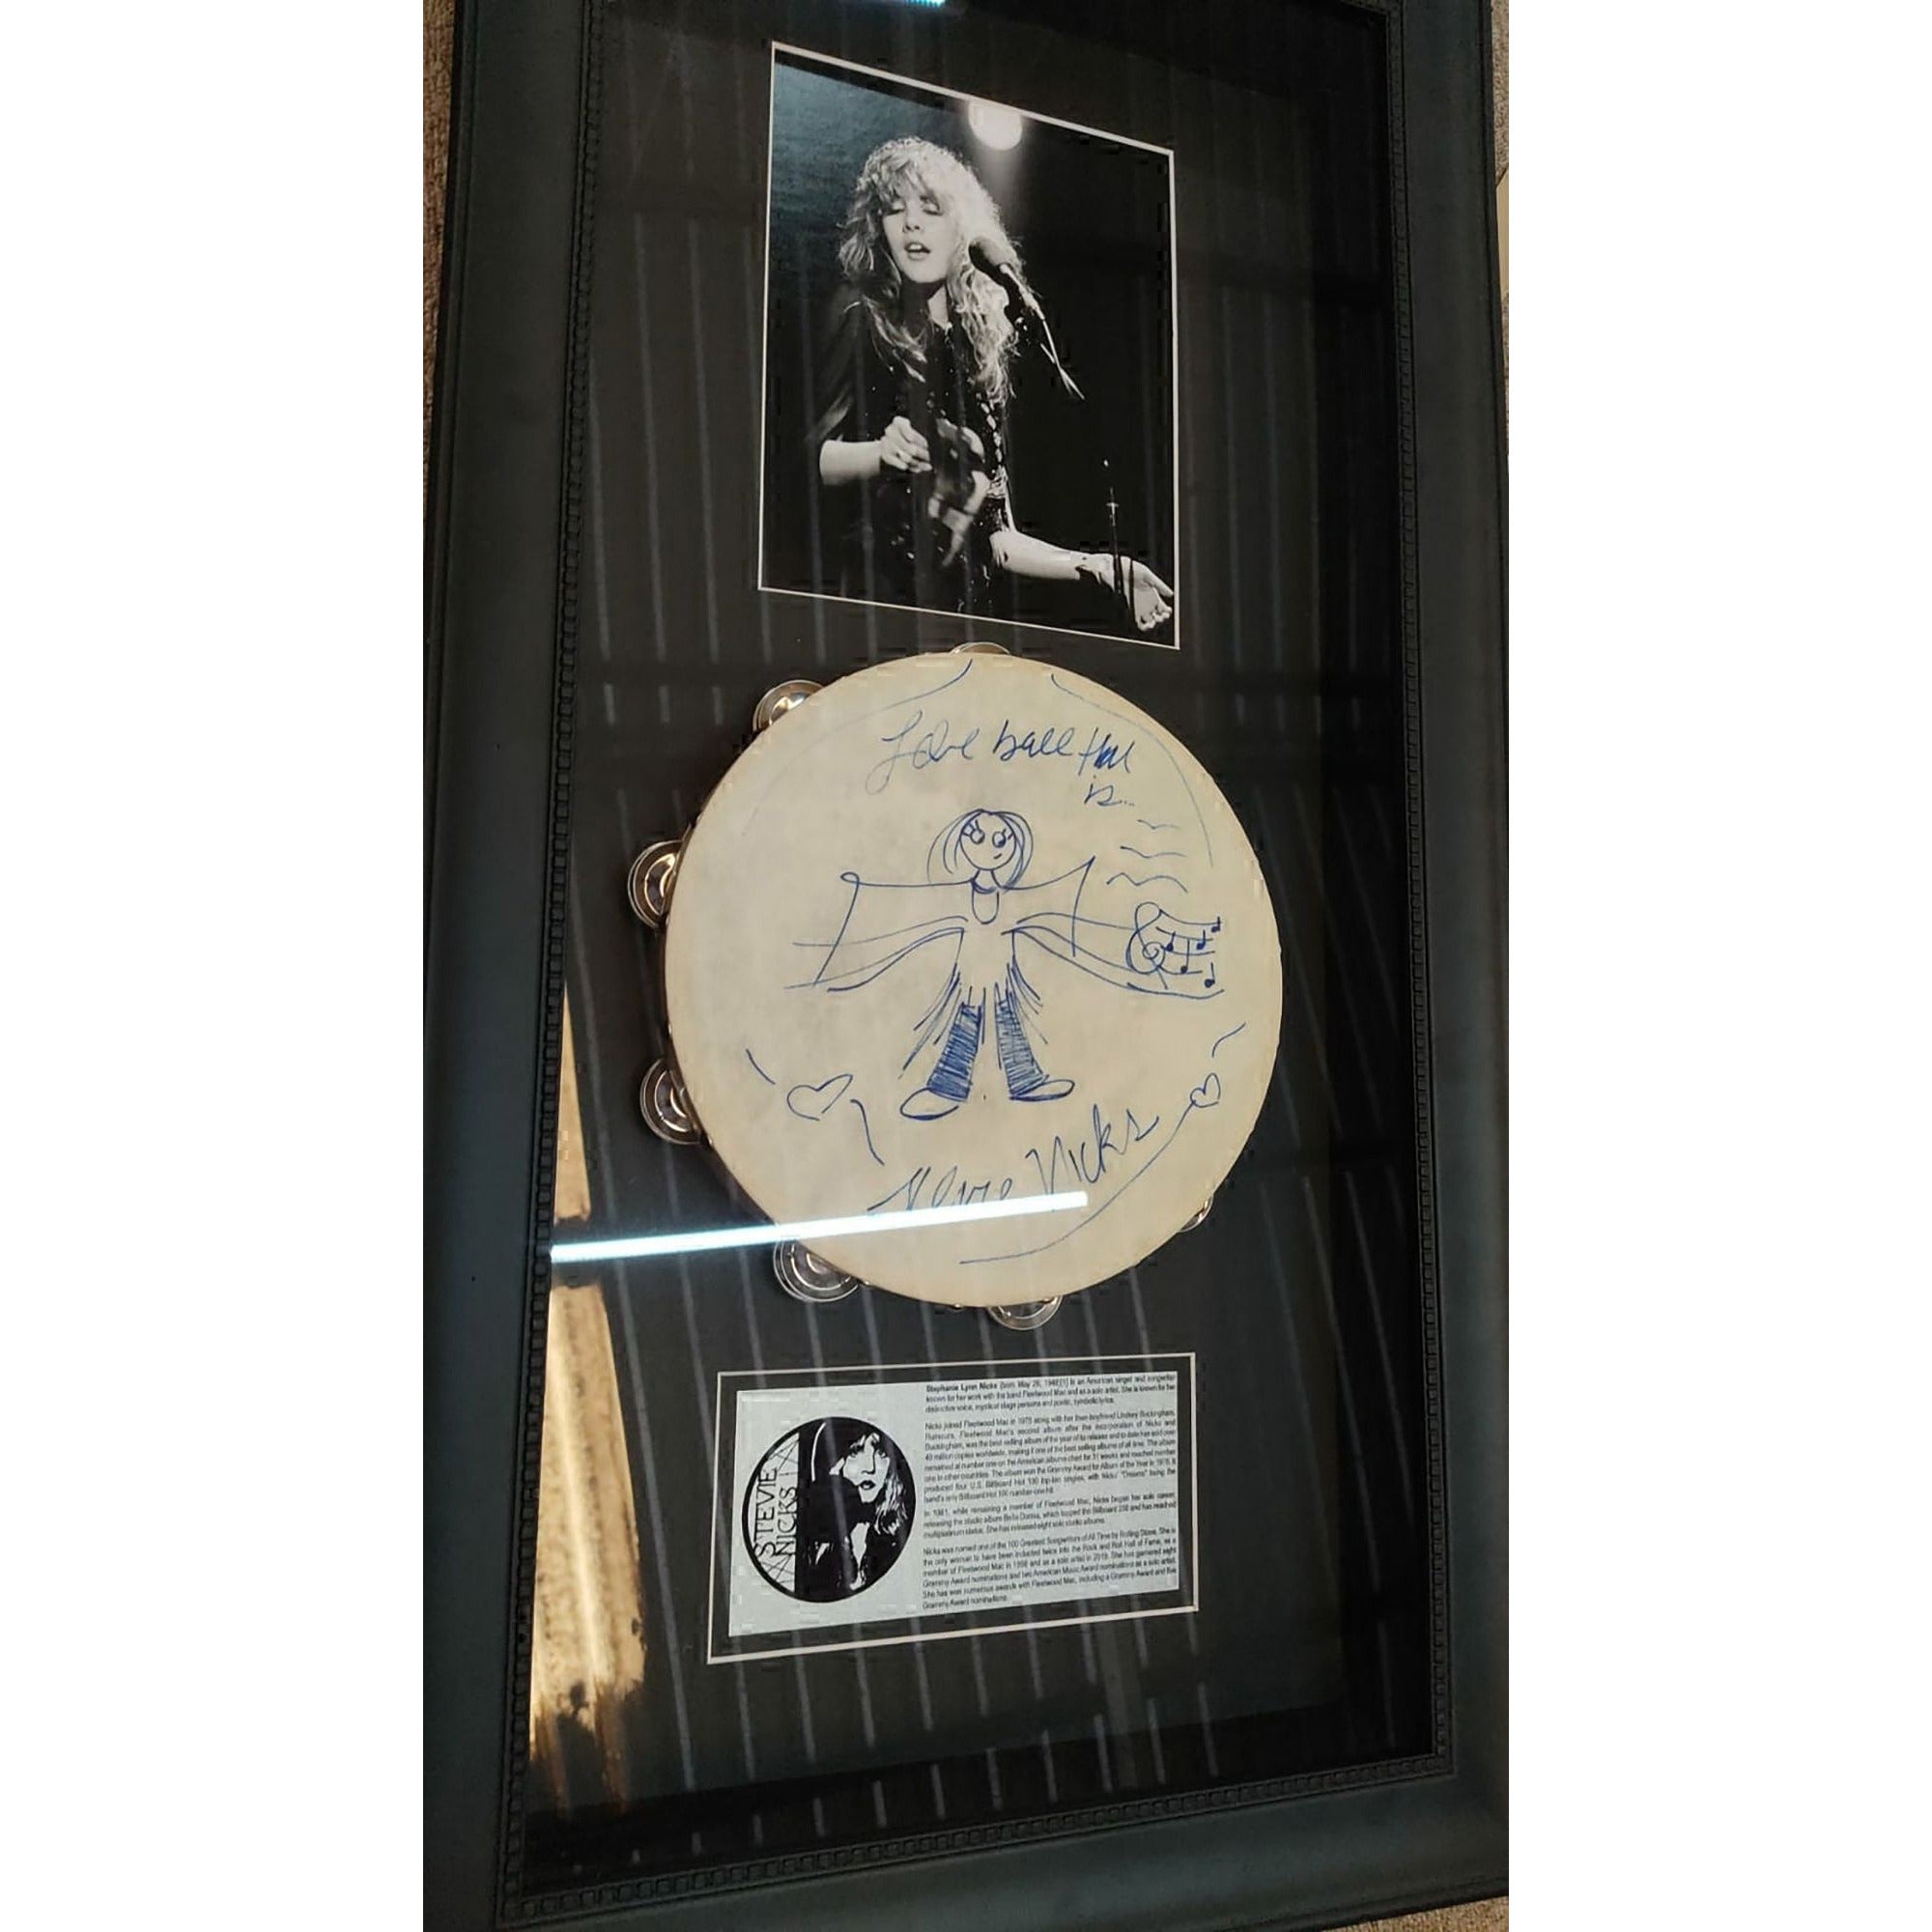 David Grohl Taylor Hawkins Foo Fighters 10 inch tambourine signed with proof